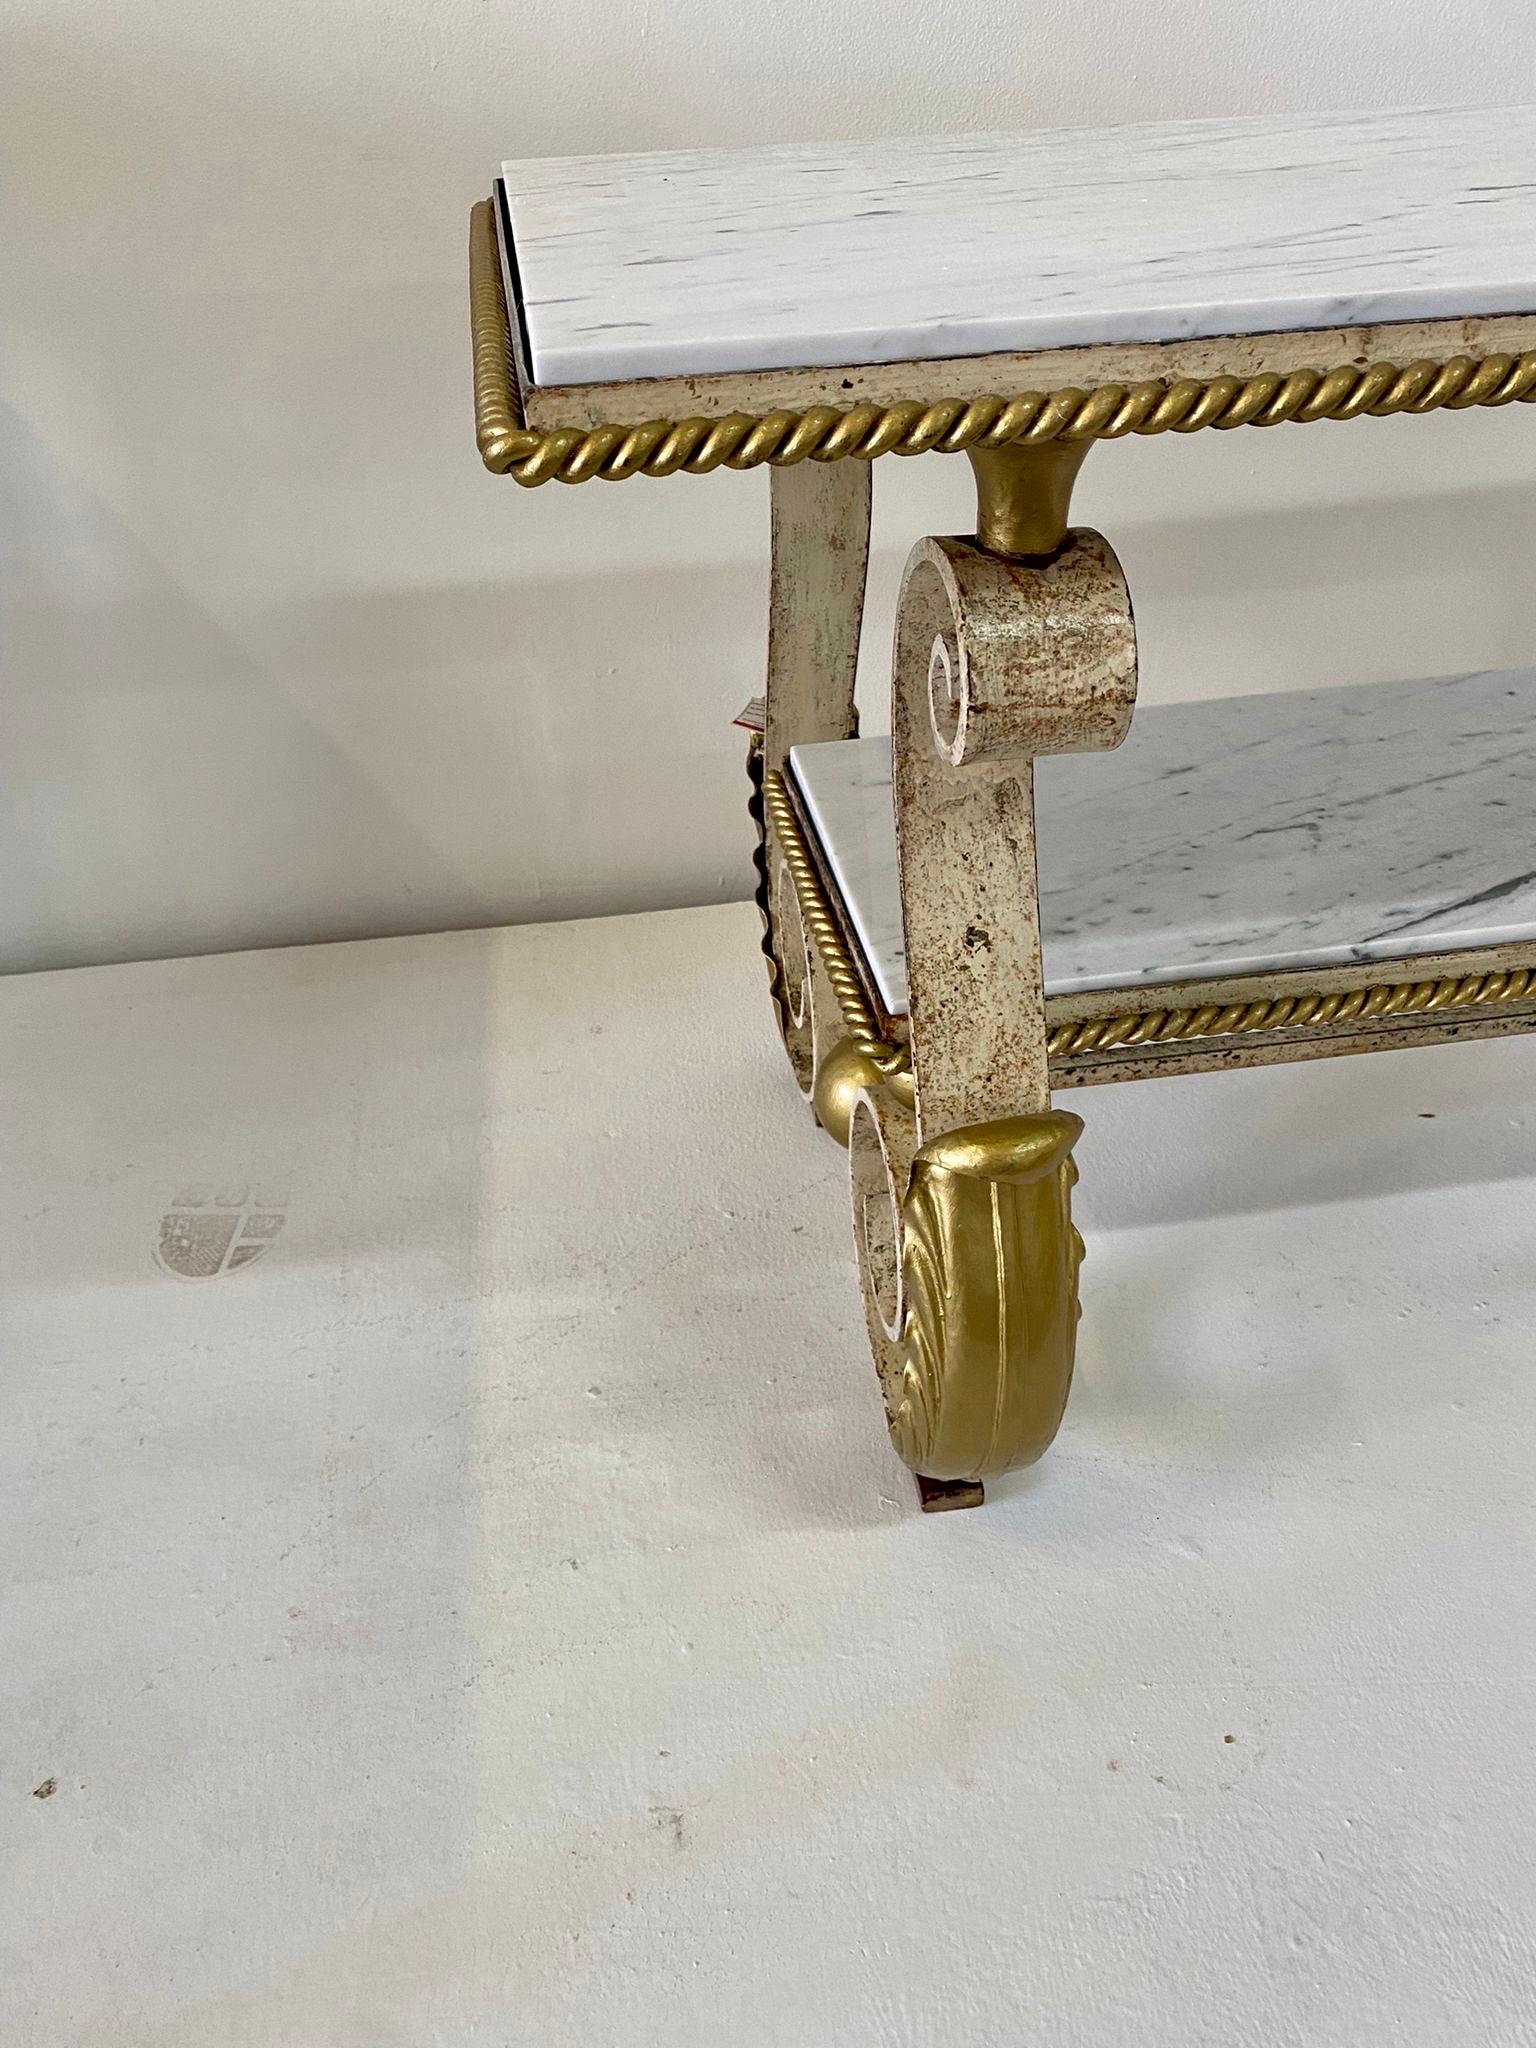 Scrolled iron legs with acanthus lead motif details. White marble newly replaced to both levels. Metal shows age and patina to demonstrate its actual vintage nature. Beautiful gold gilding painted to edges of marble - it is stunning! note: lower